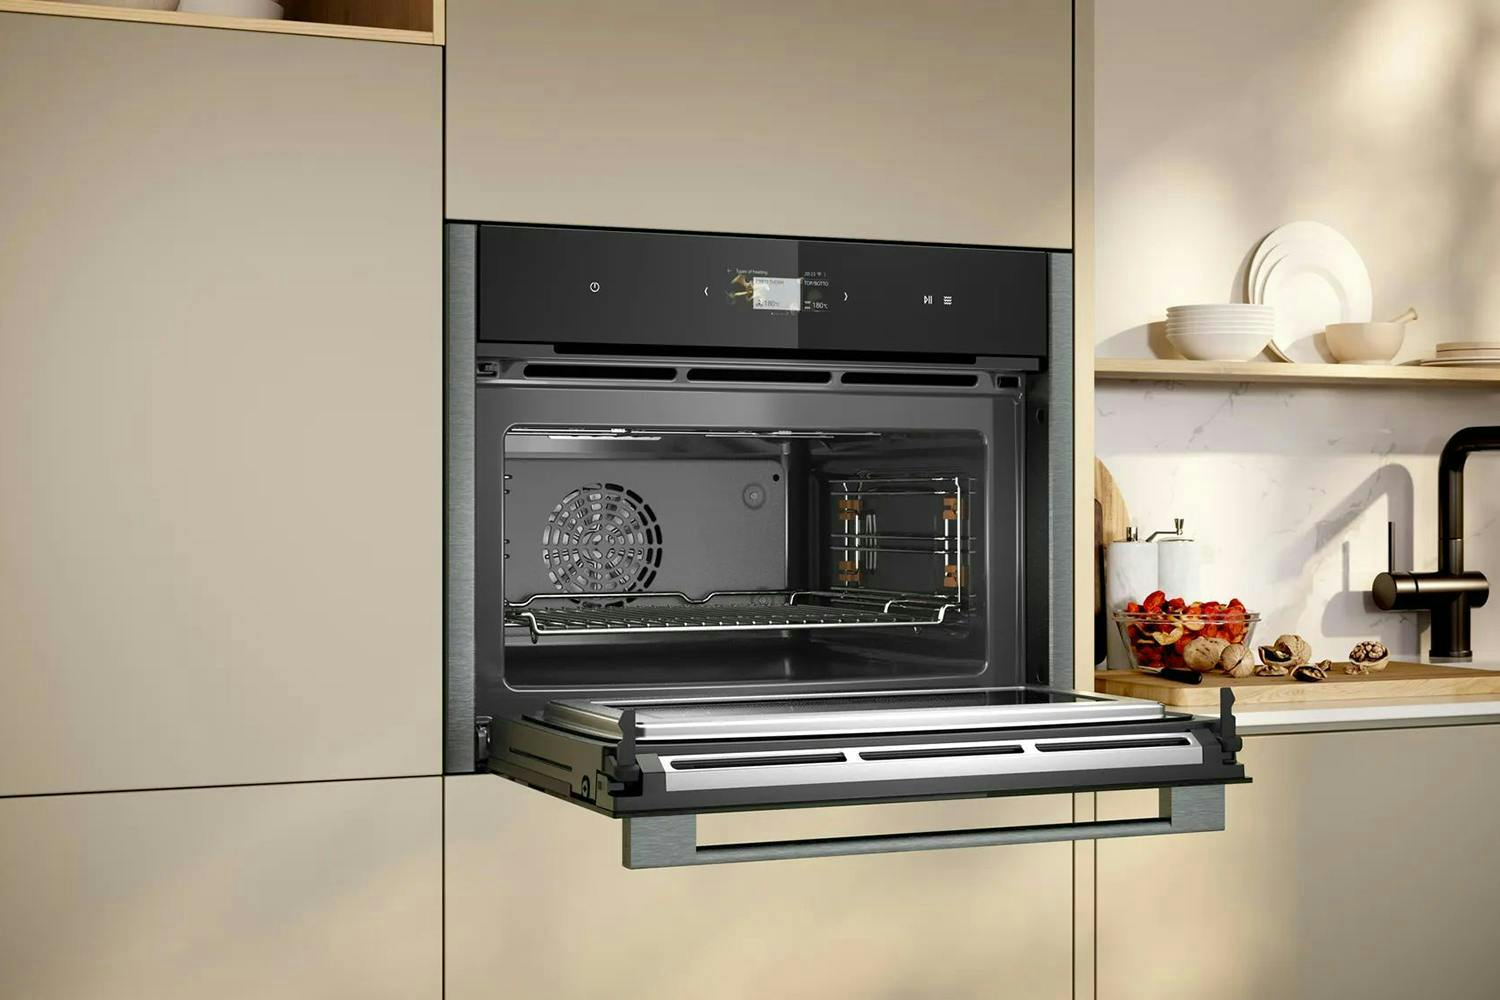 Neff N90 Built-in Compact Single Oven and N90 Slide and Hide Built-in Electric Single Oven Bundle